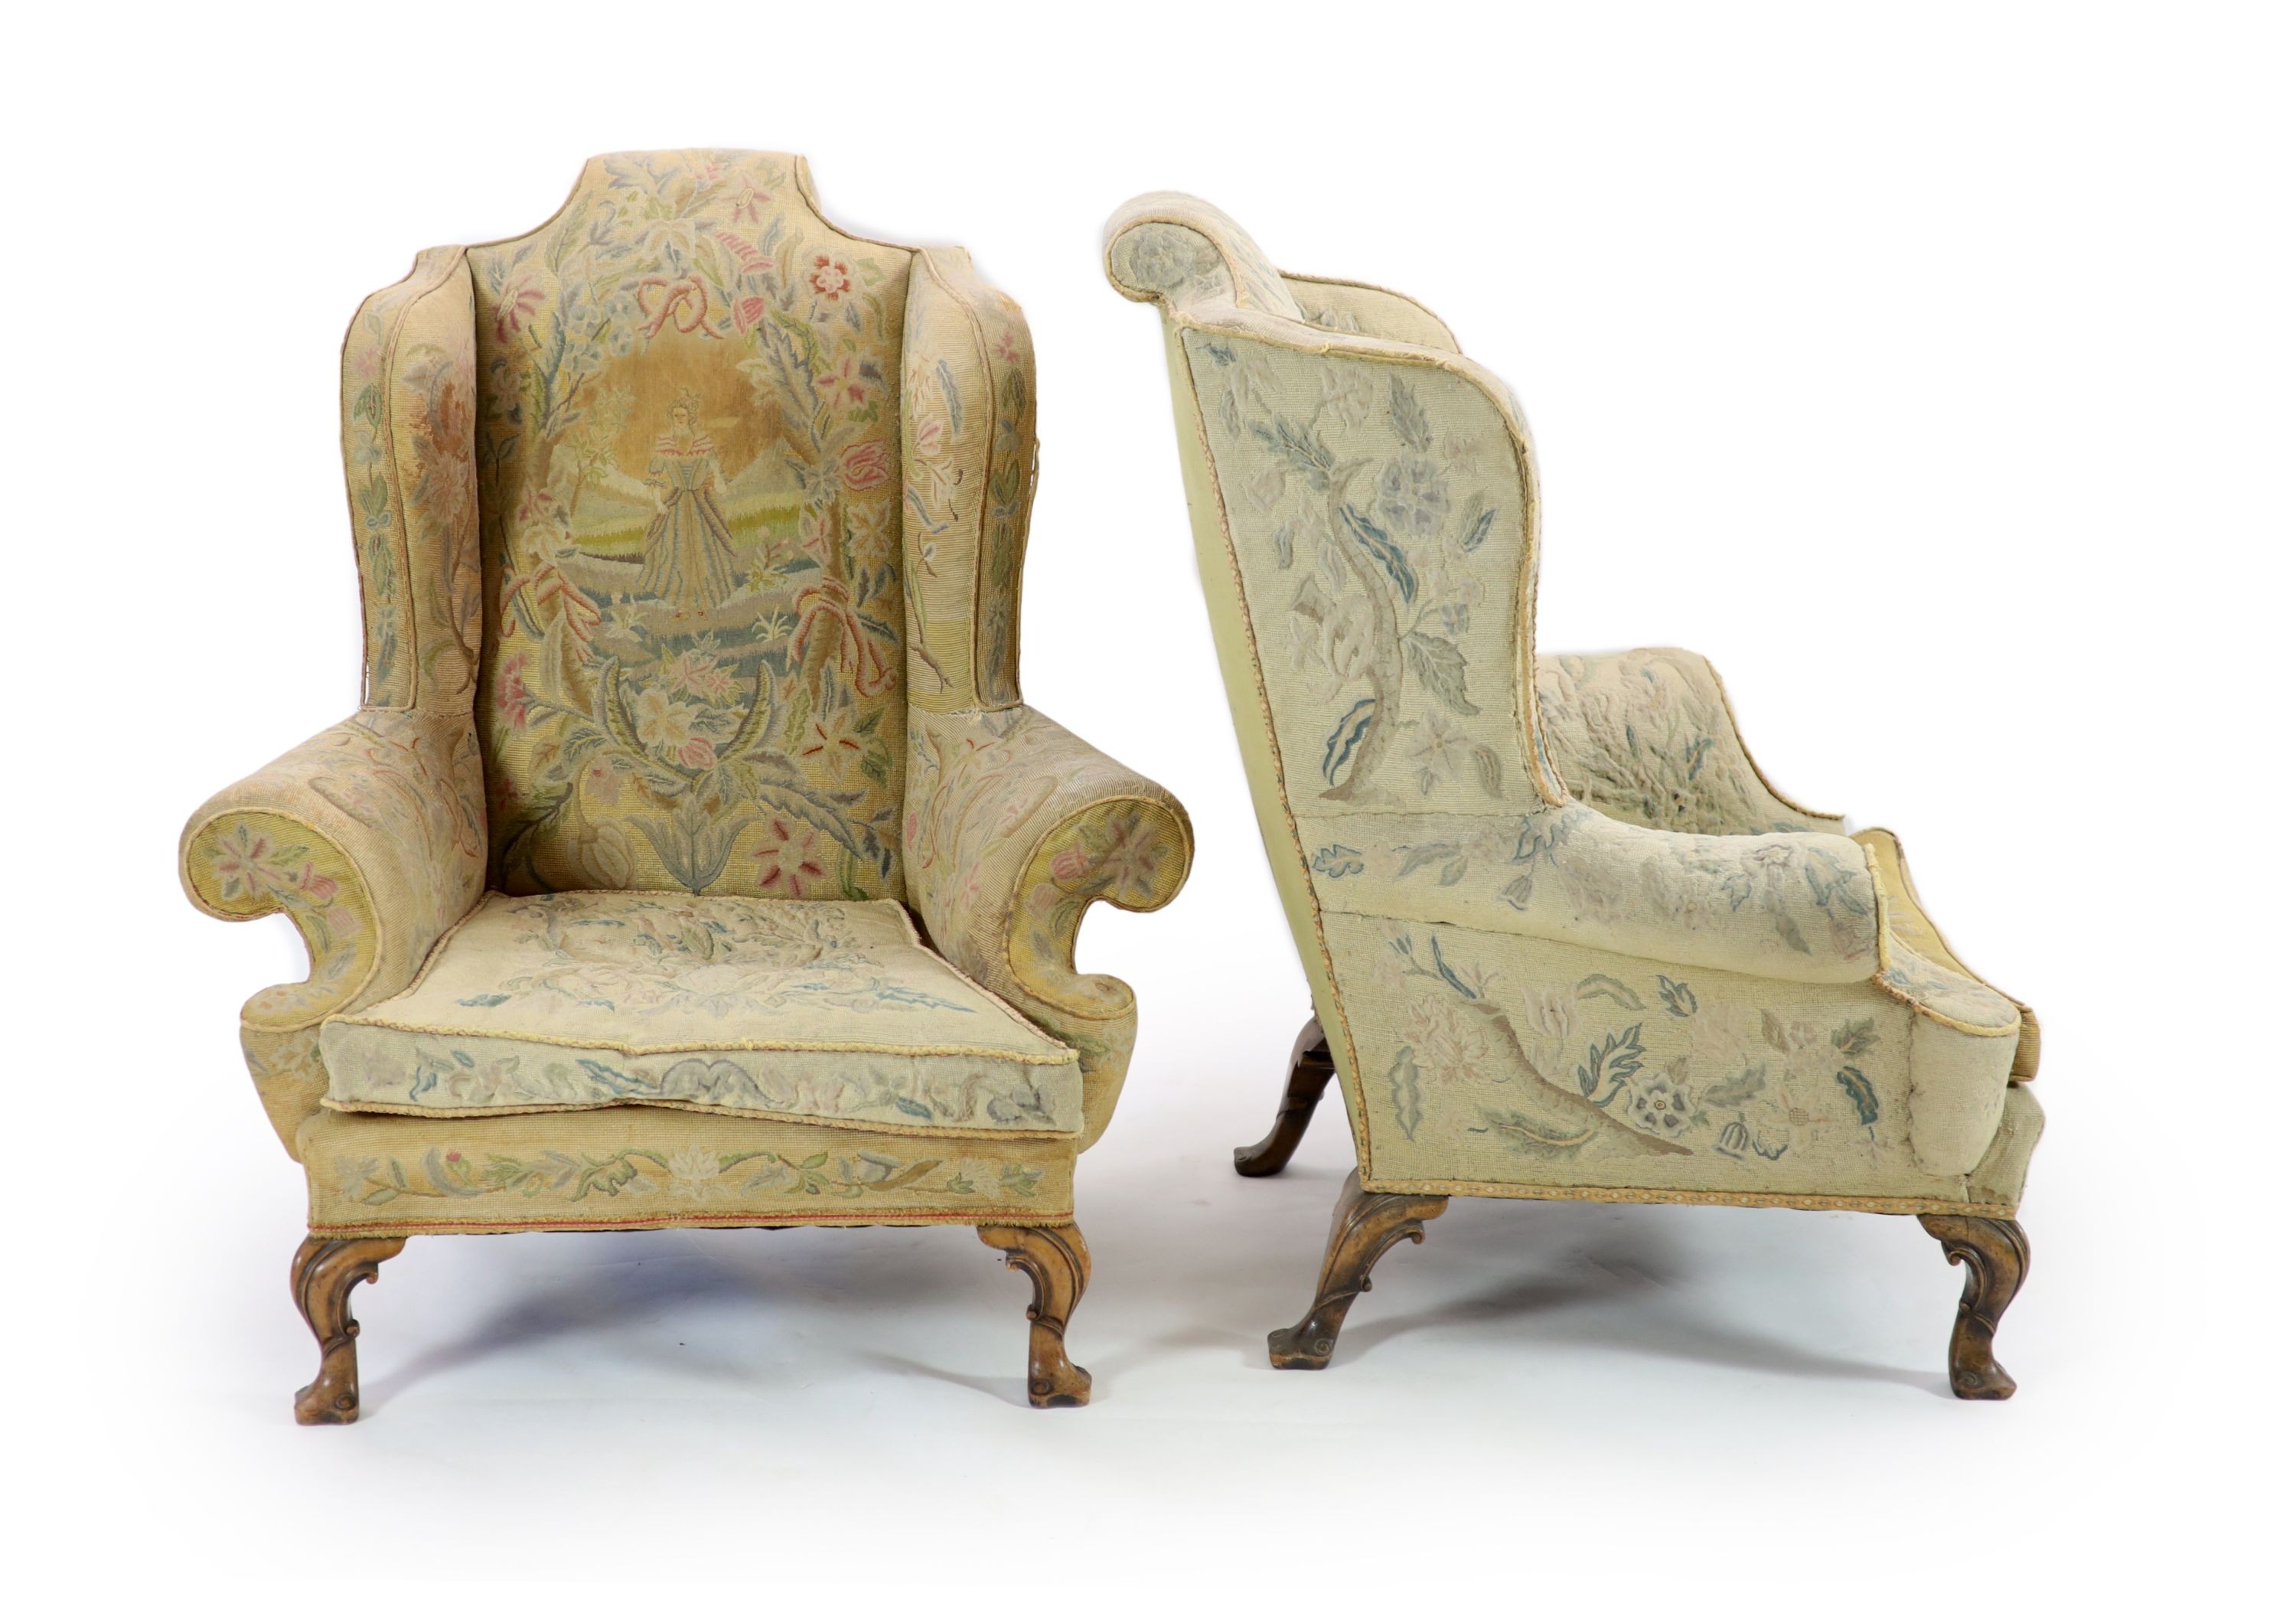 A pair of Georgian style mahogany wing armchairsof generous proportions, upholstered in faded